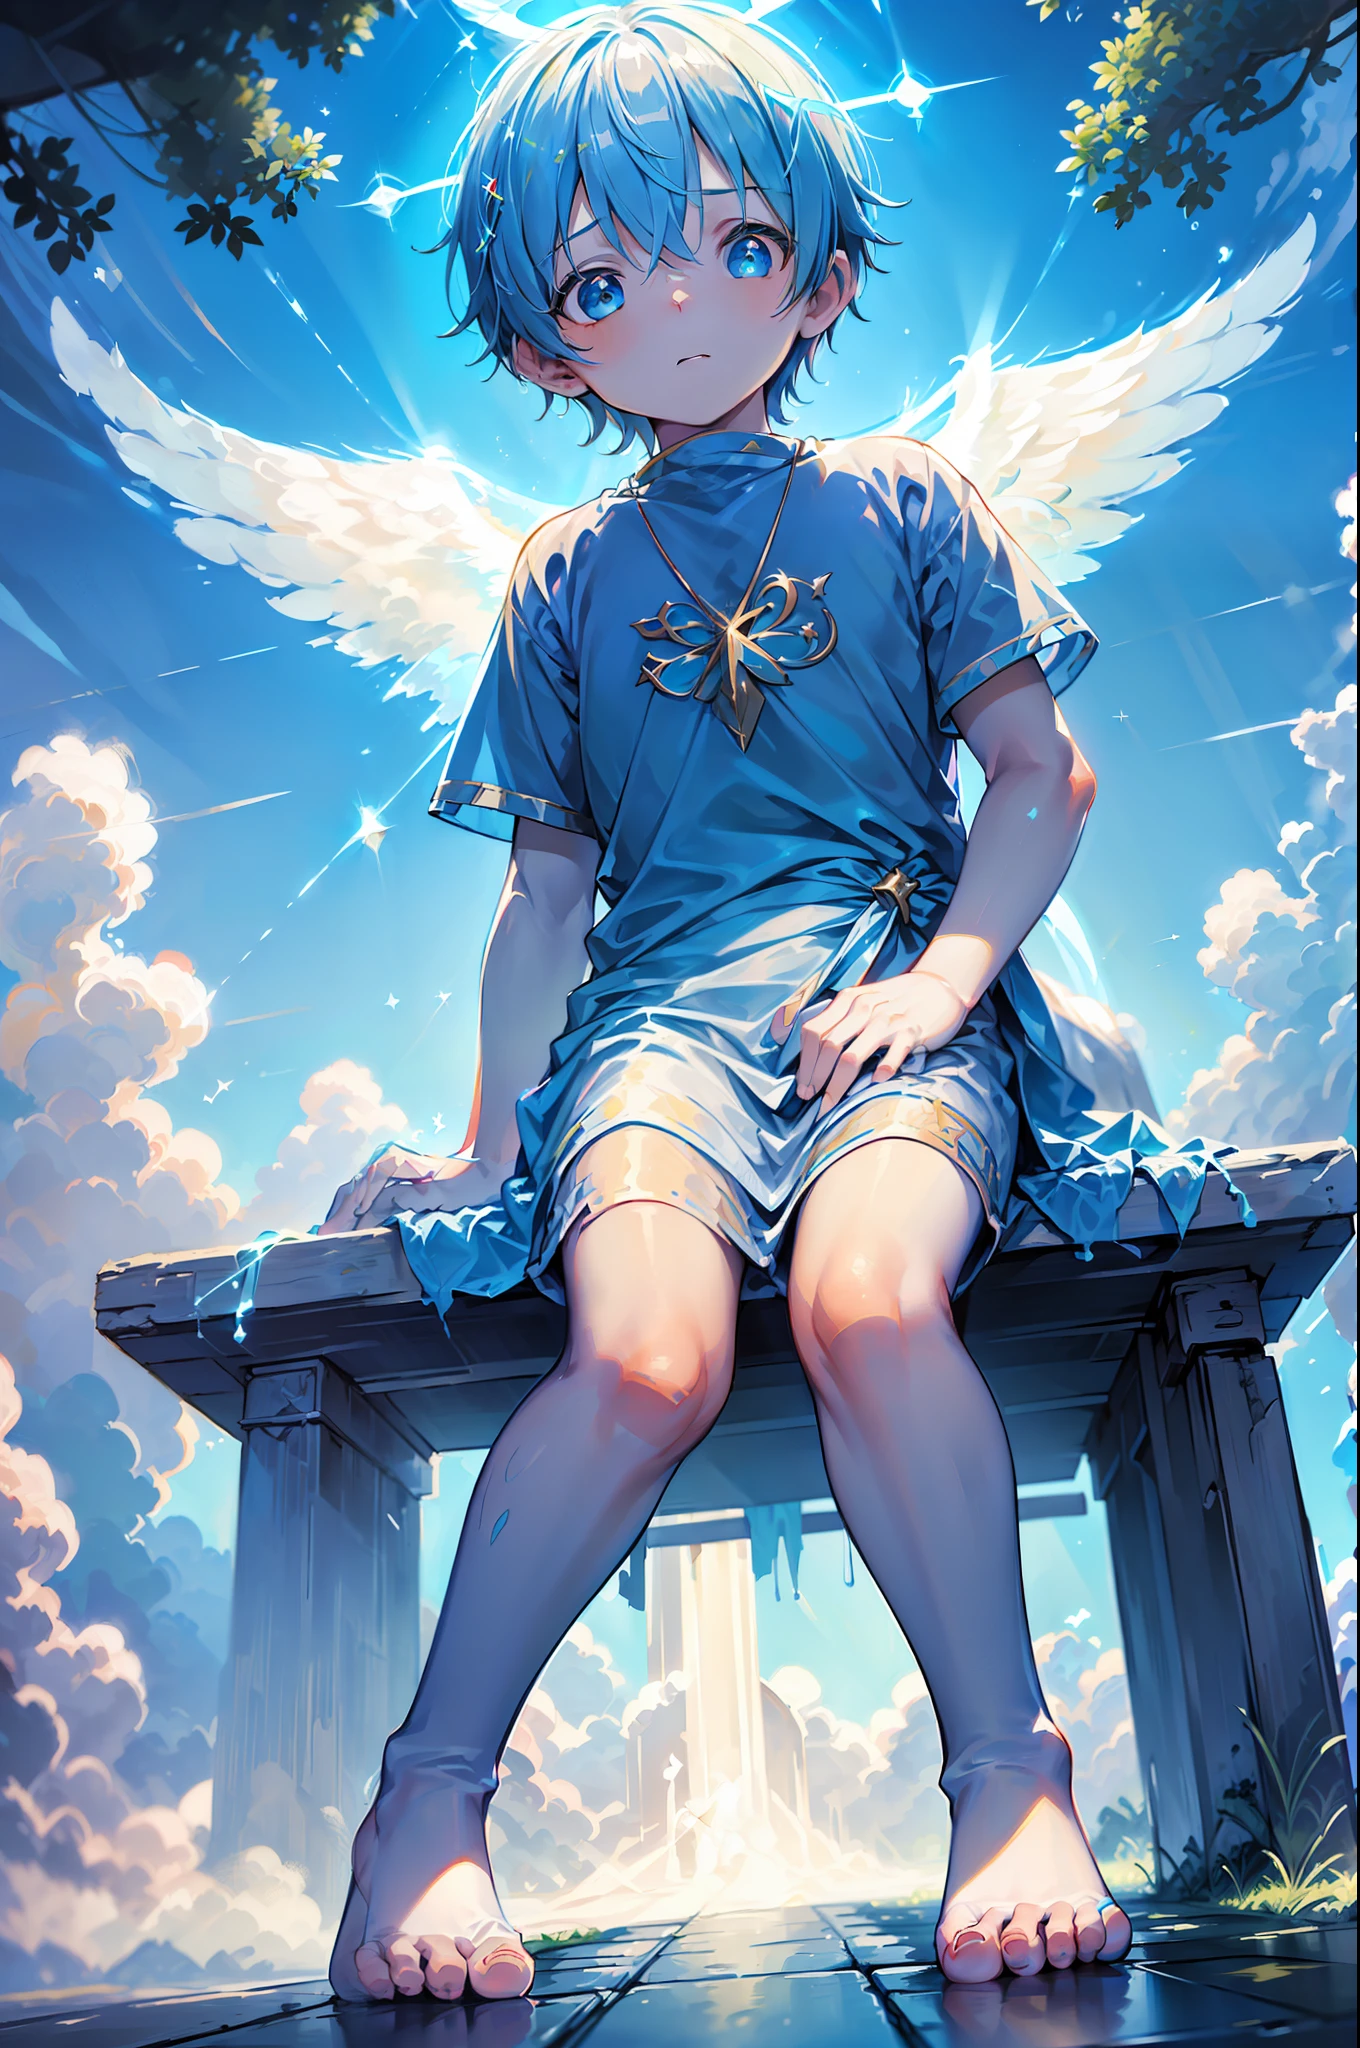 4k, (Masterpiece:1), Little boy with blue colored hair and shiny, glowing cyan eyes and barefoot and angel wings on his back, wearing divine clothes, sitting on a sidewalk, young, boy, , small, toddler, tiny feet, focus on feet, sexy feet, blushing, (Young:1.4), (Child:1.4), (Shota:1.4), (male:1.4), (boy:1.4), (divine:1.4), (divine clothes:1.4)